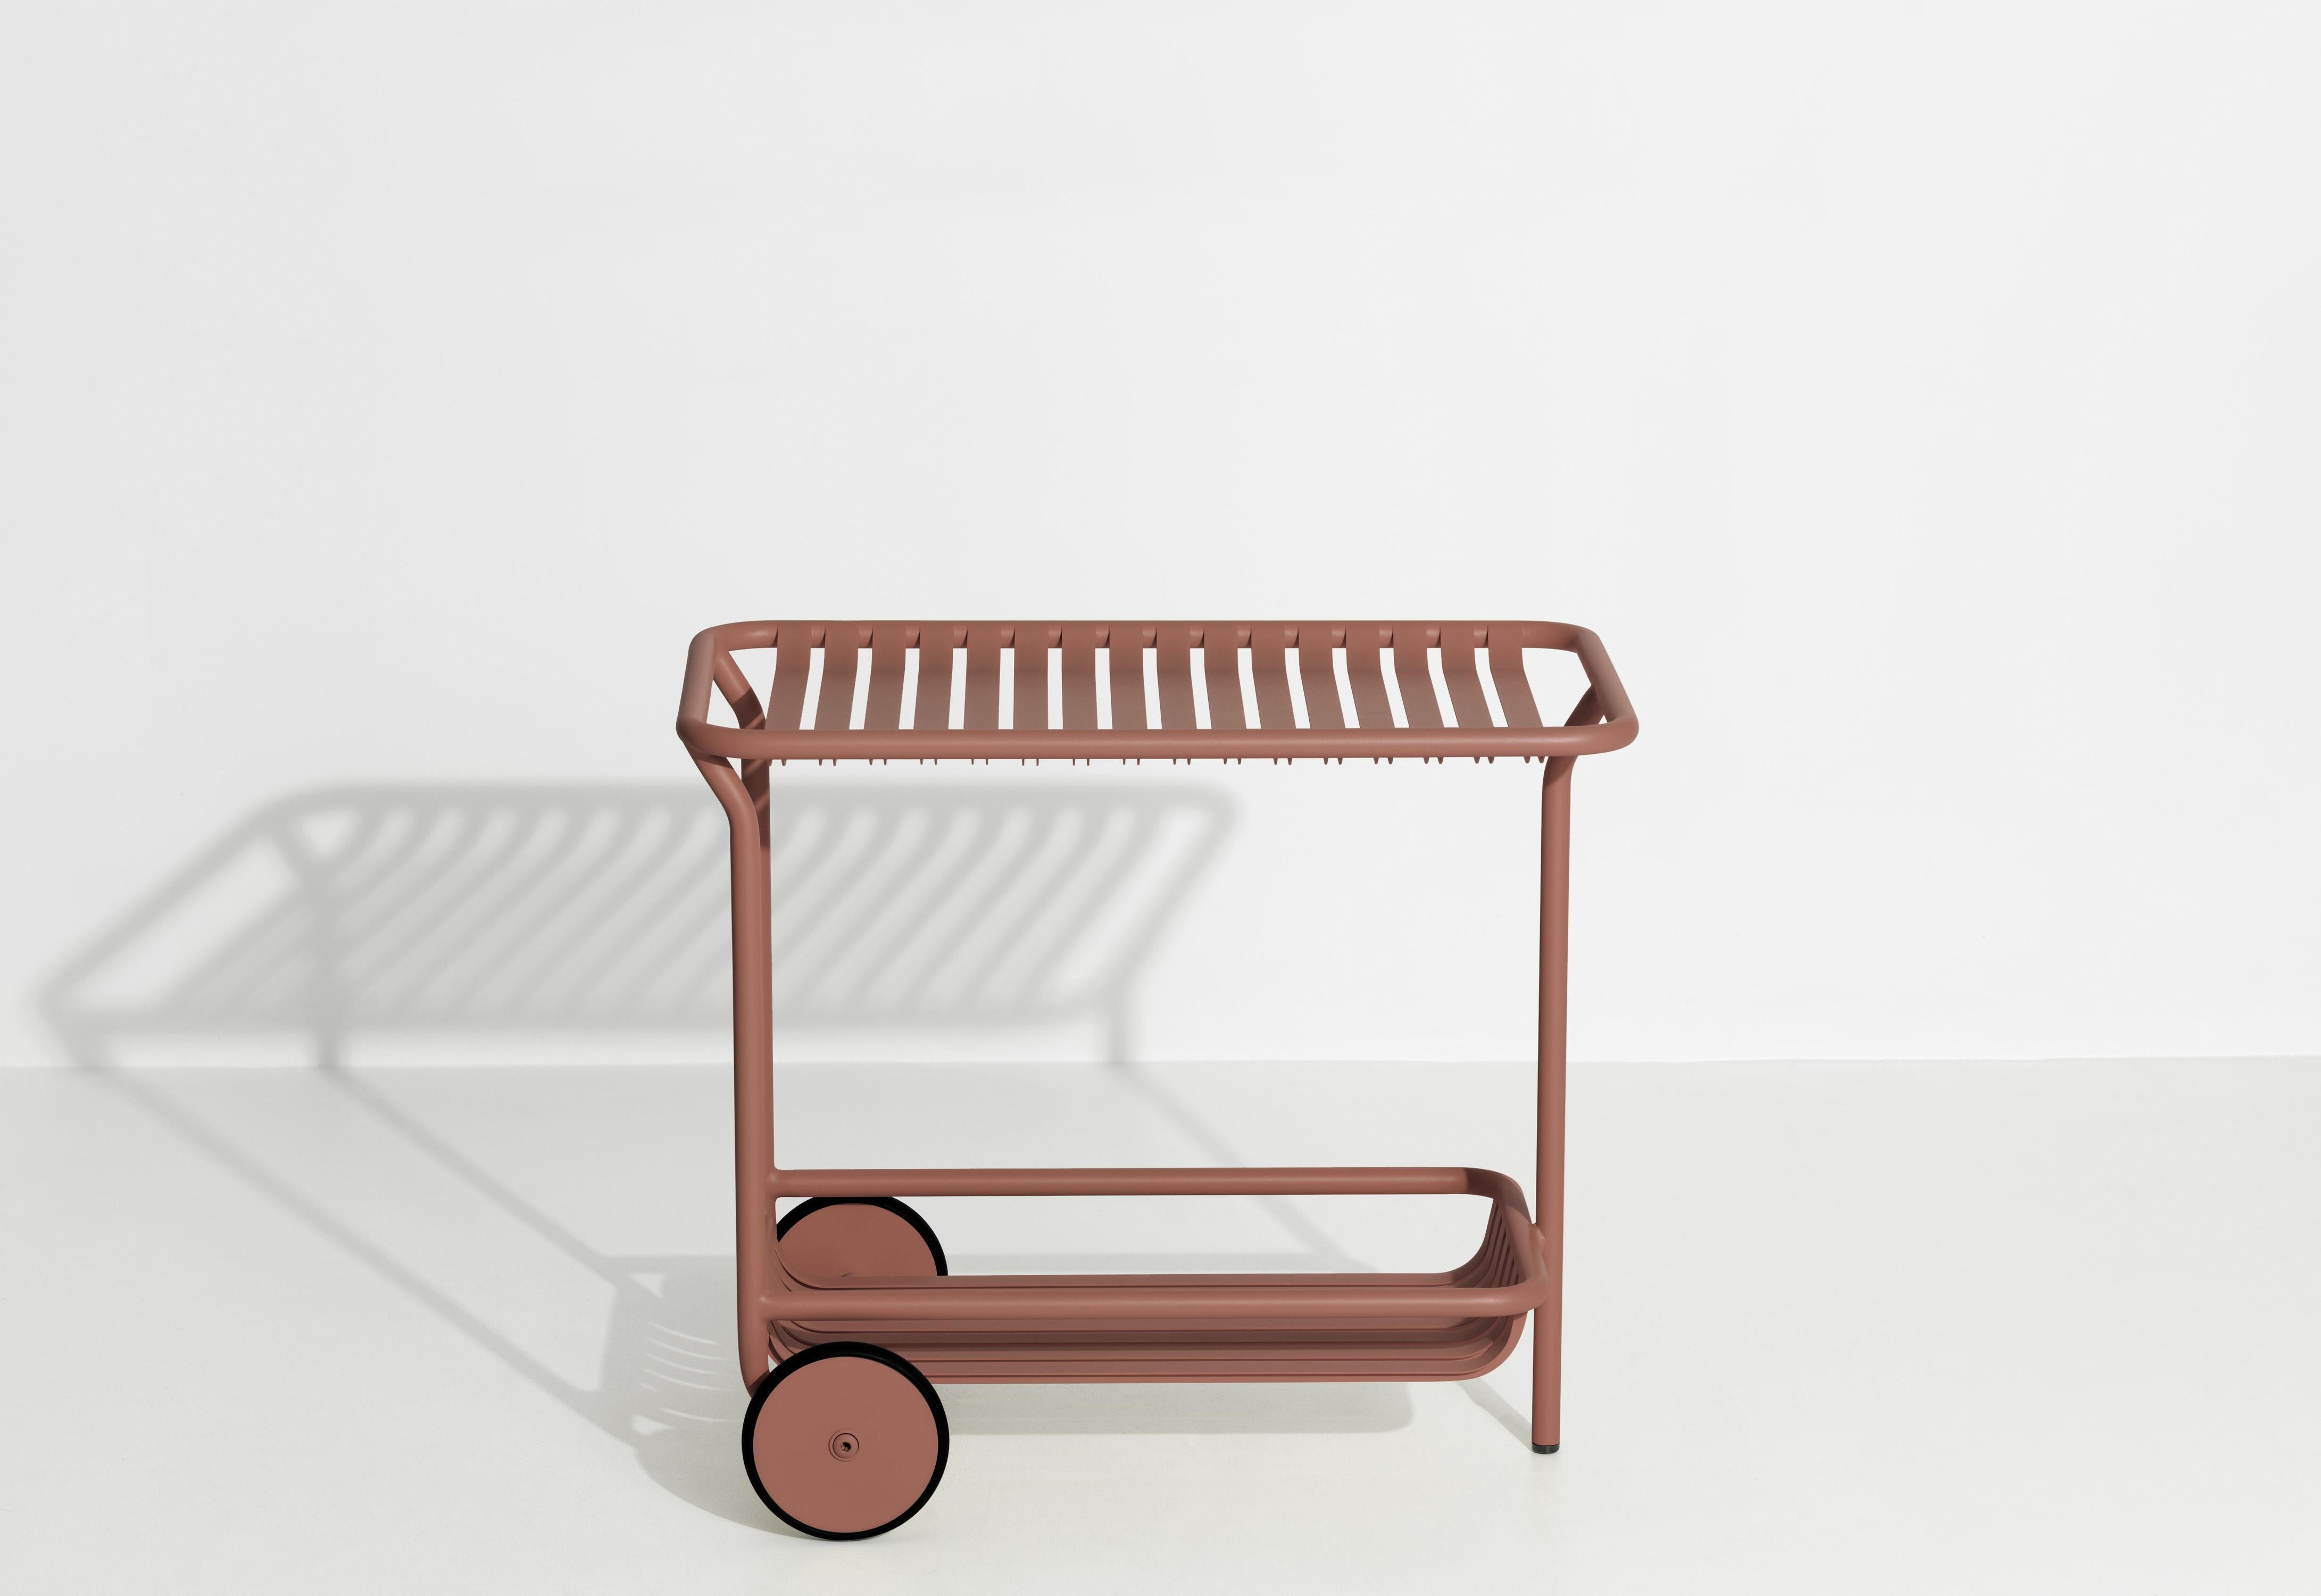 Petite Friture Week-End Trolley in Terracotta Aluminium by Studio BrichetZiegler, 2017

The week-end collection is a full range of outdoor furniture, in aluminium grained epoxy paint, matt finish, that includes 18 functions and 8 colours for the